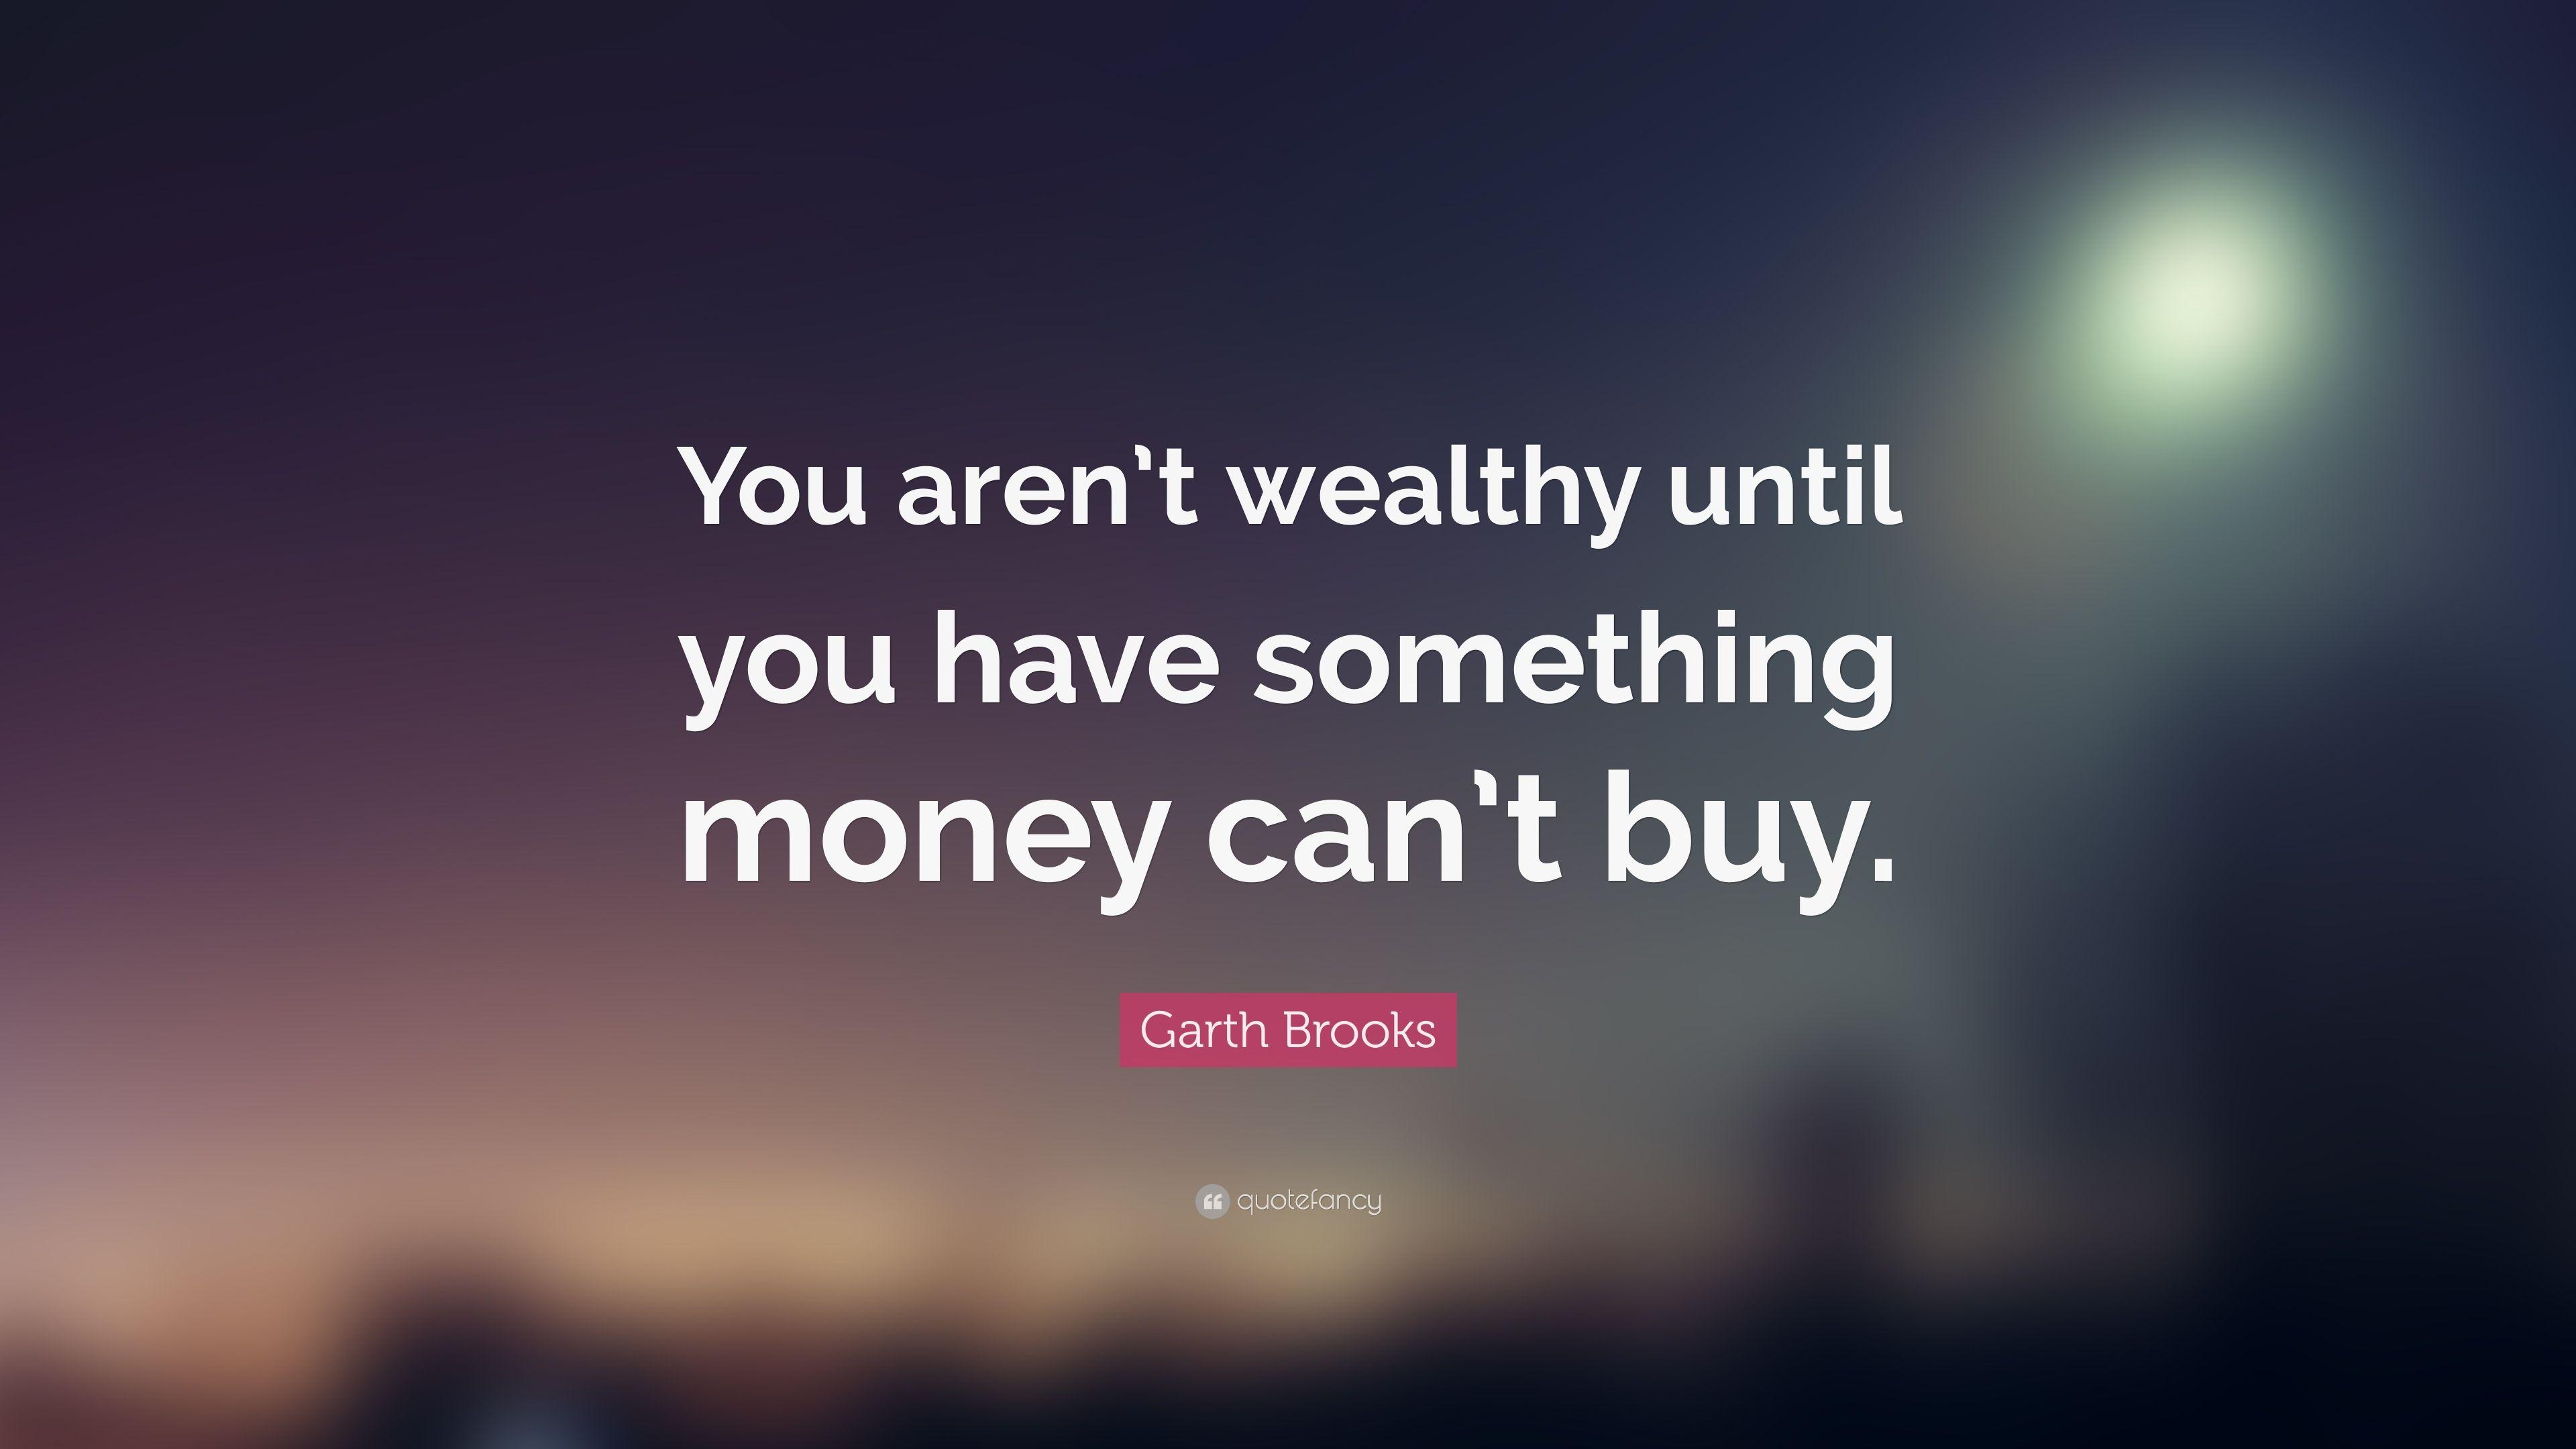 Garth Brooks Quote: “You aren't wealthy until you have something